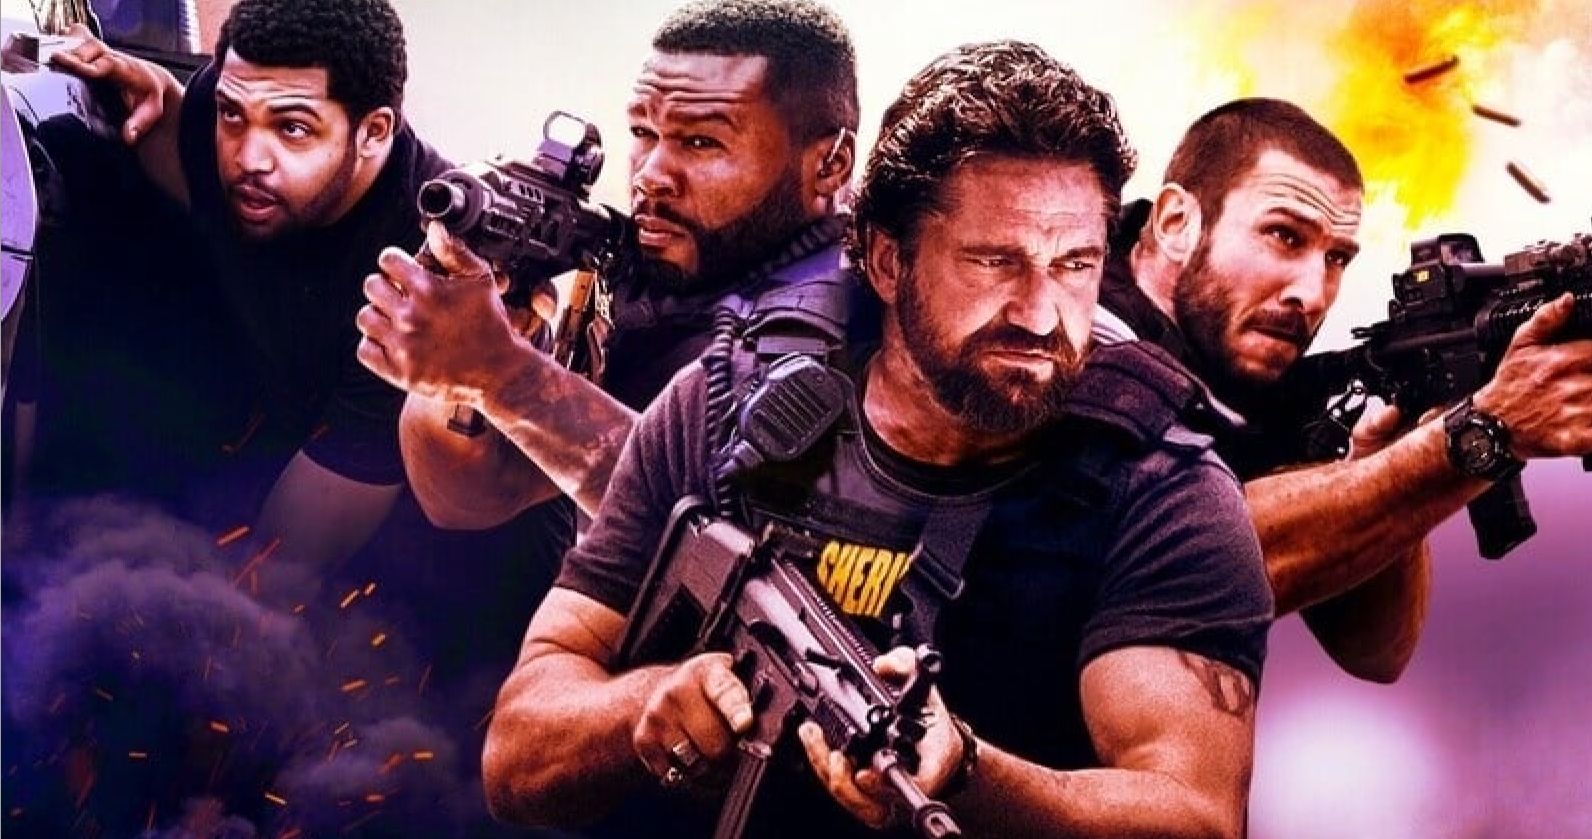 Den of Thieves 2 Shoots Early Next Year, Will Be a Lot More Fun and Sexy